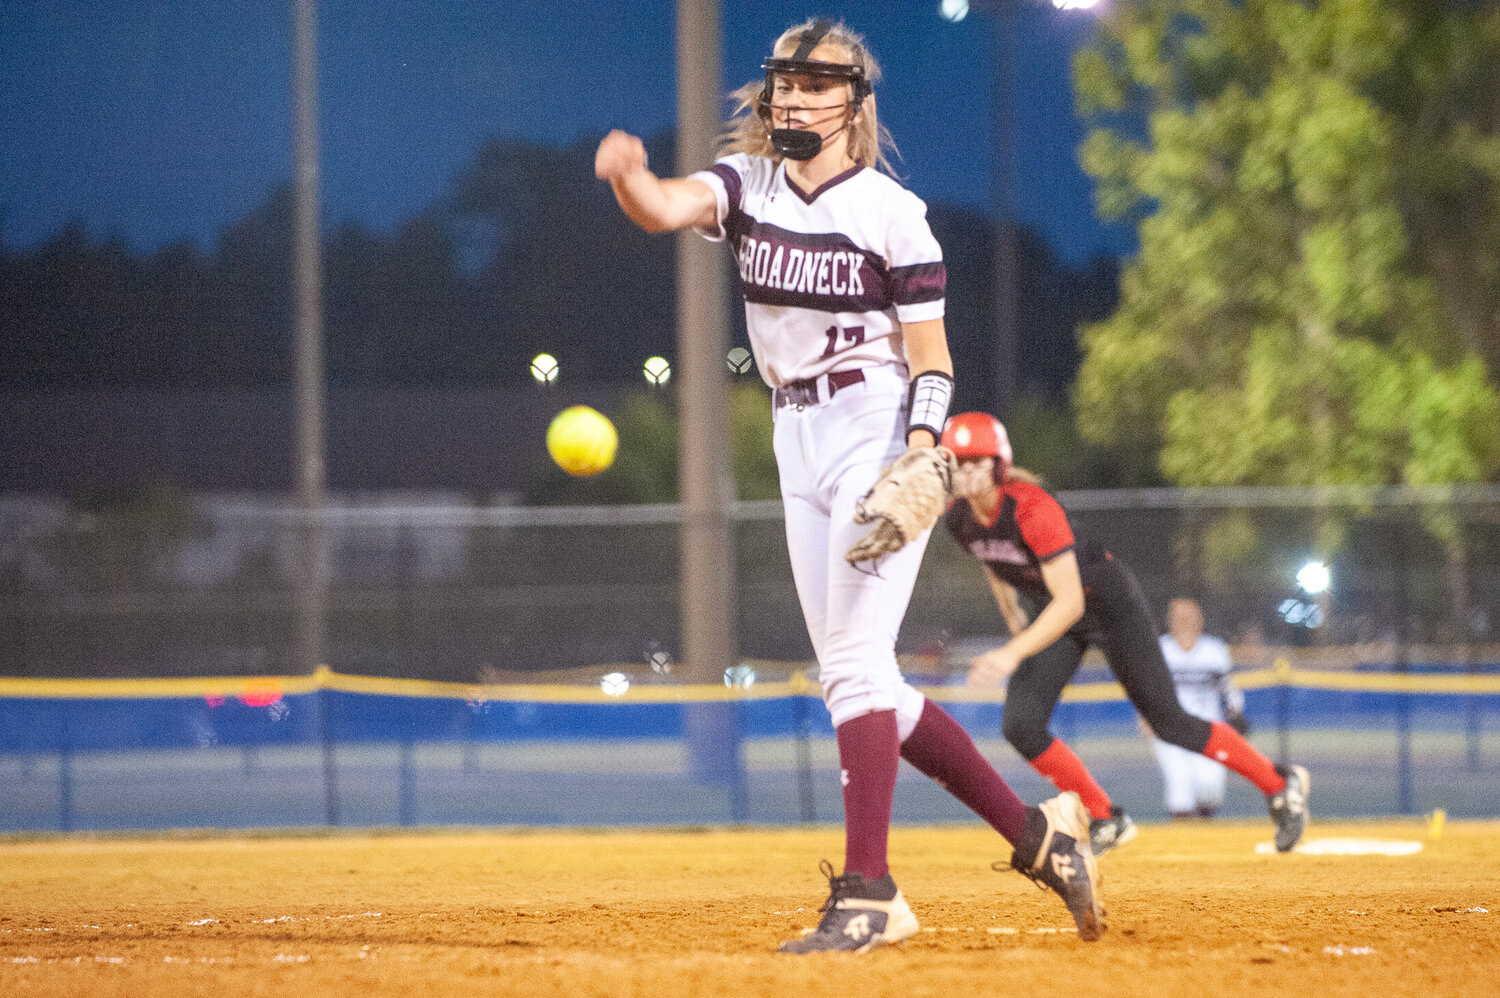 Relief pitcher Hailey Adamson tried to keep the Bruins in the game.